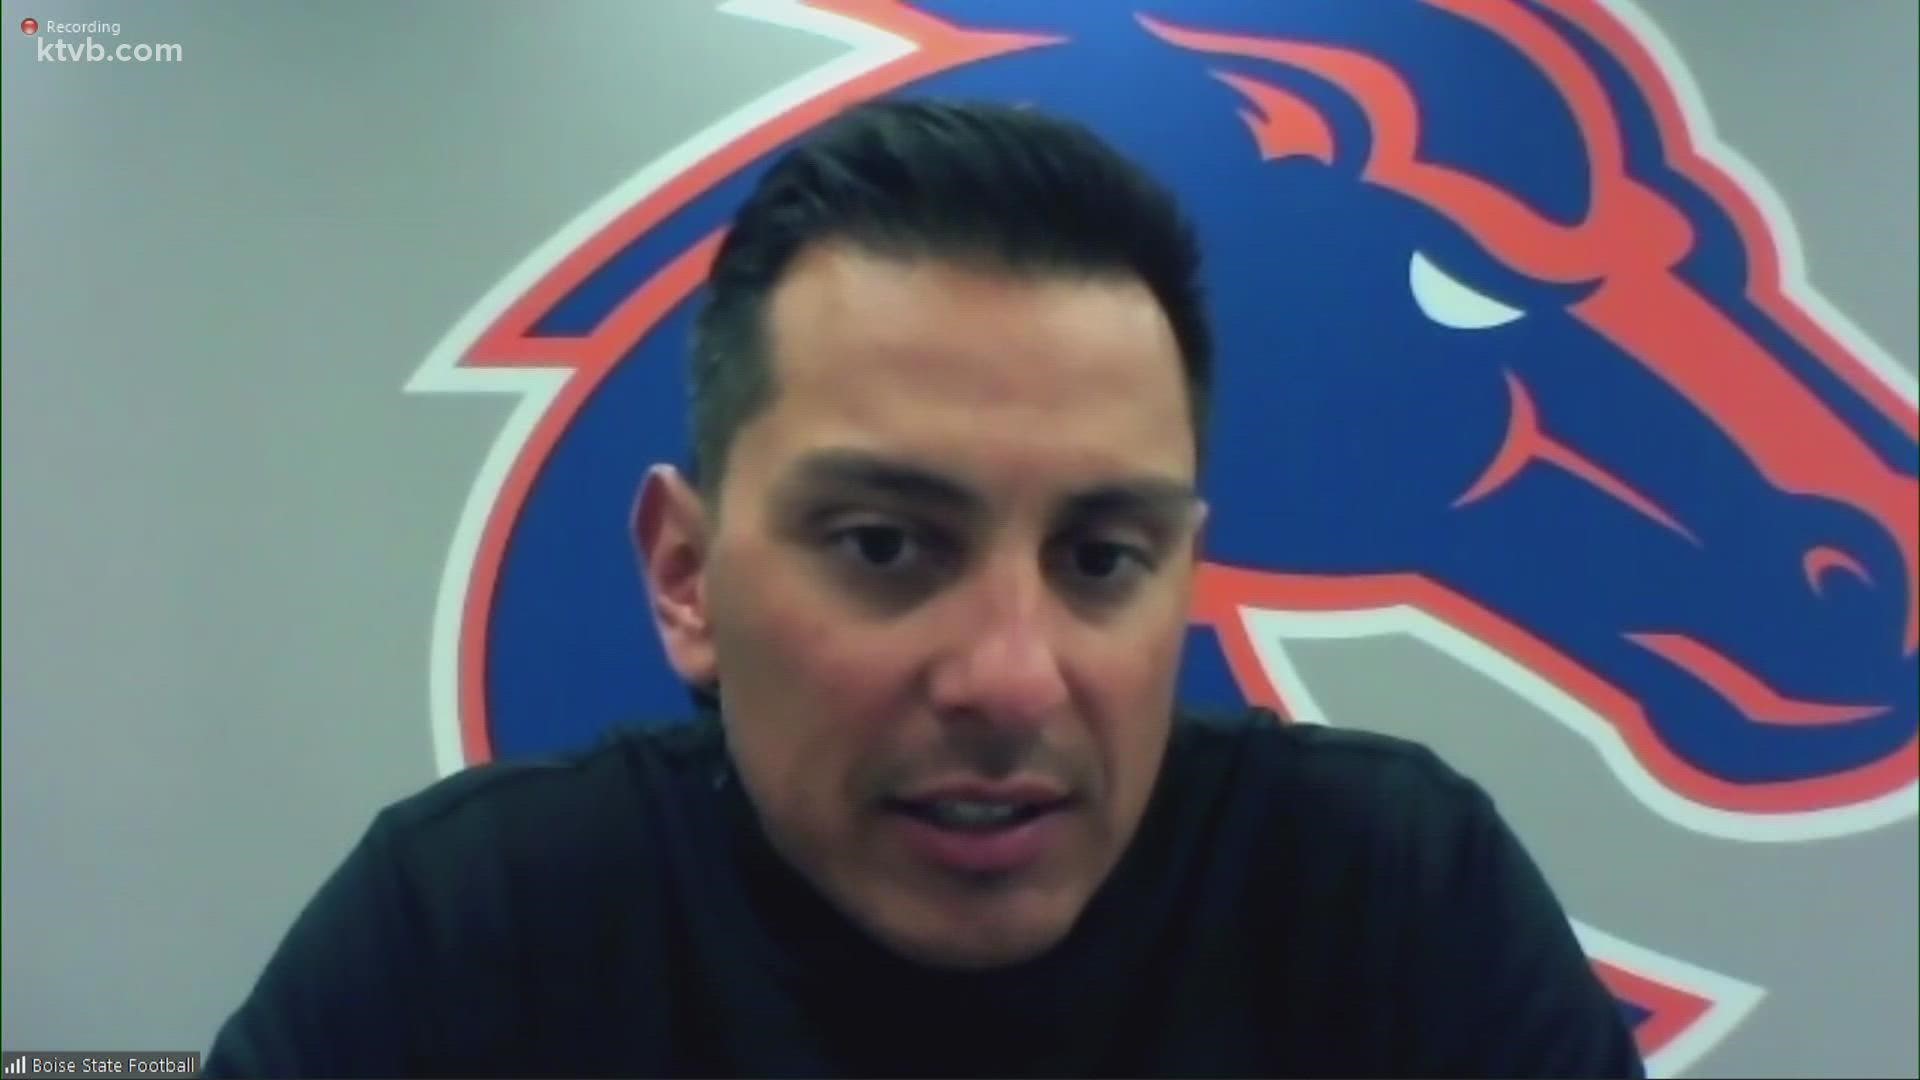 Boise State faces the Nevada Wolf Pack on The Blue Saturday. Coach Andy Avalos says his team will have to contain their explosive offensive led by QB Carson Strong.